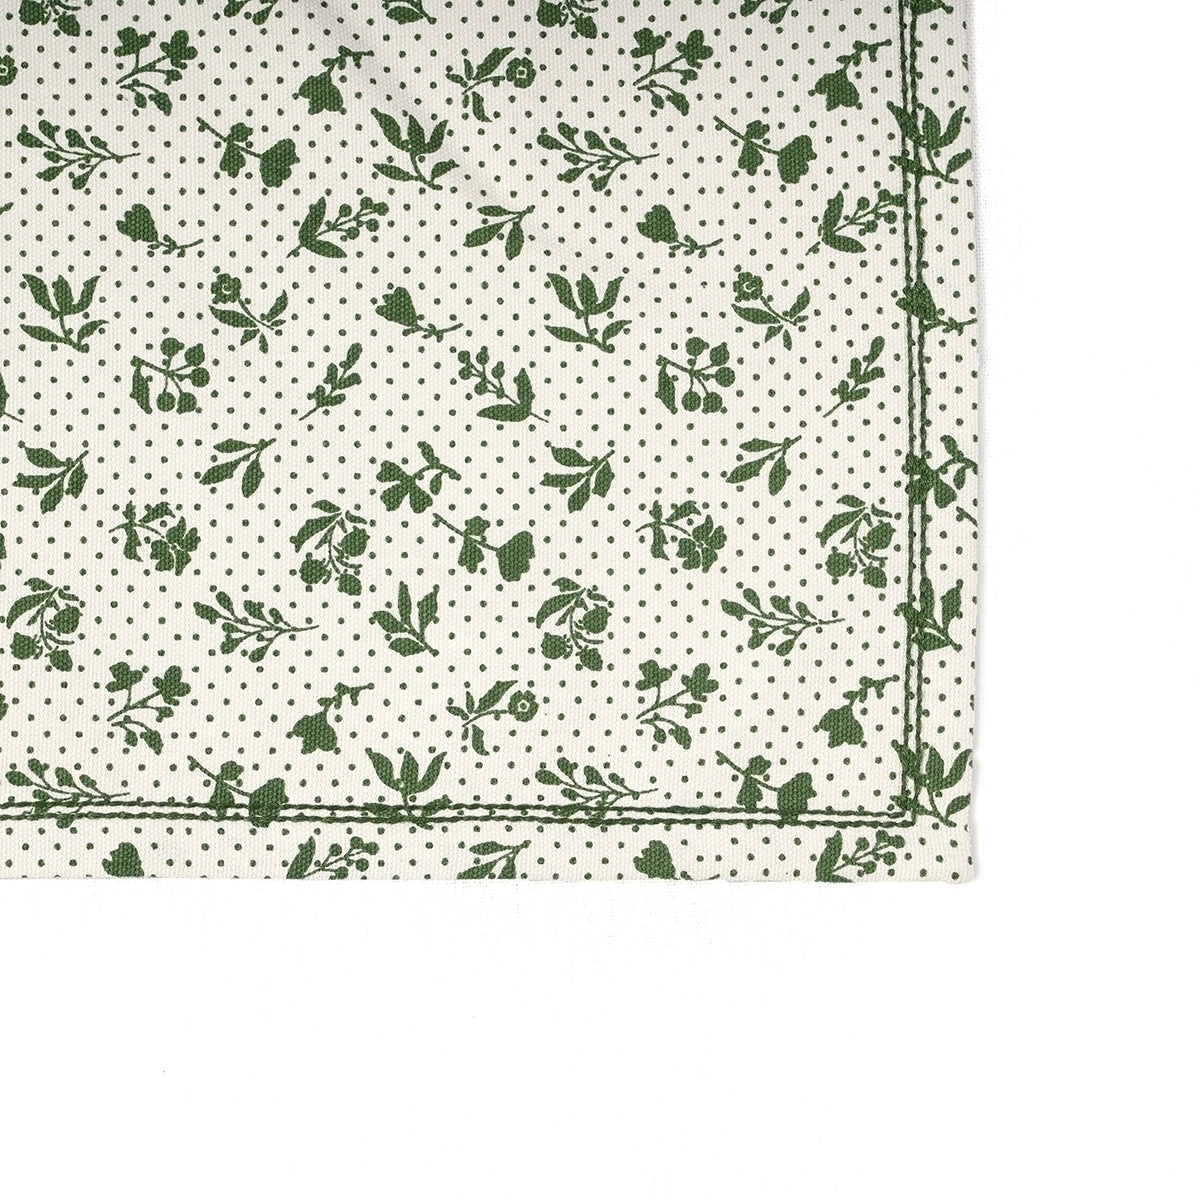 Green Printed Kitchen Towel, small floral pattern, 100% cotton, size 20"X28"